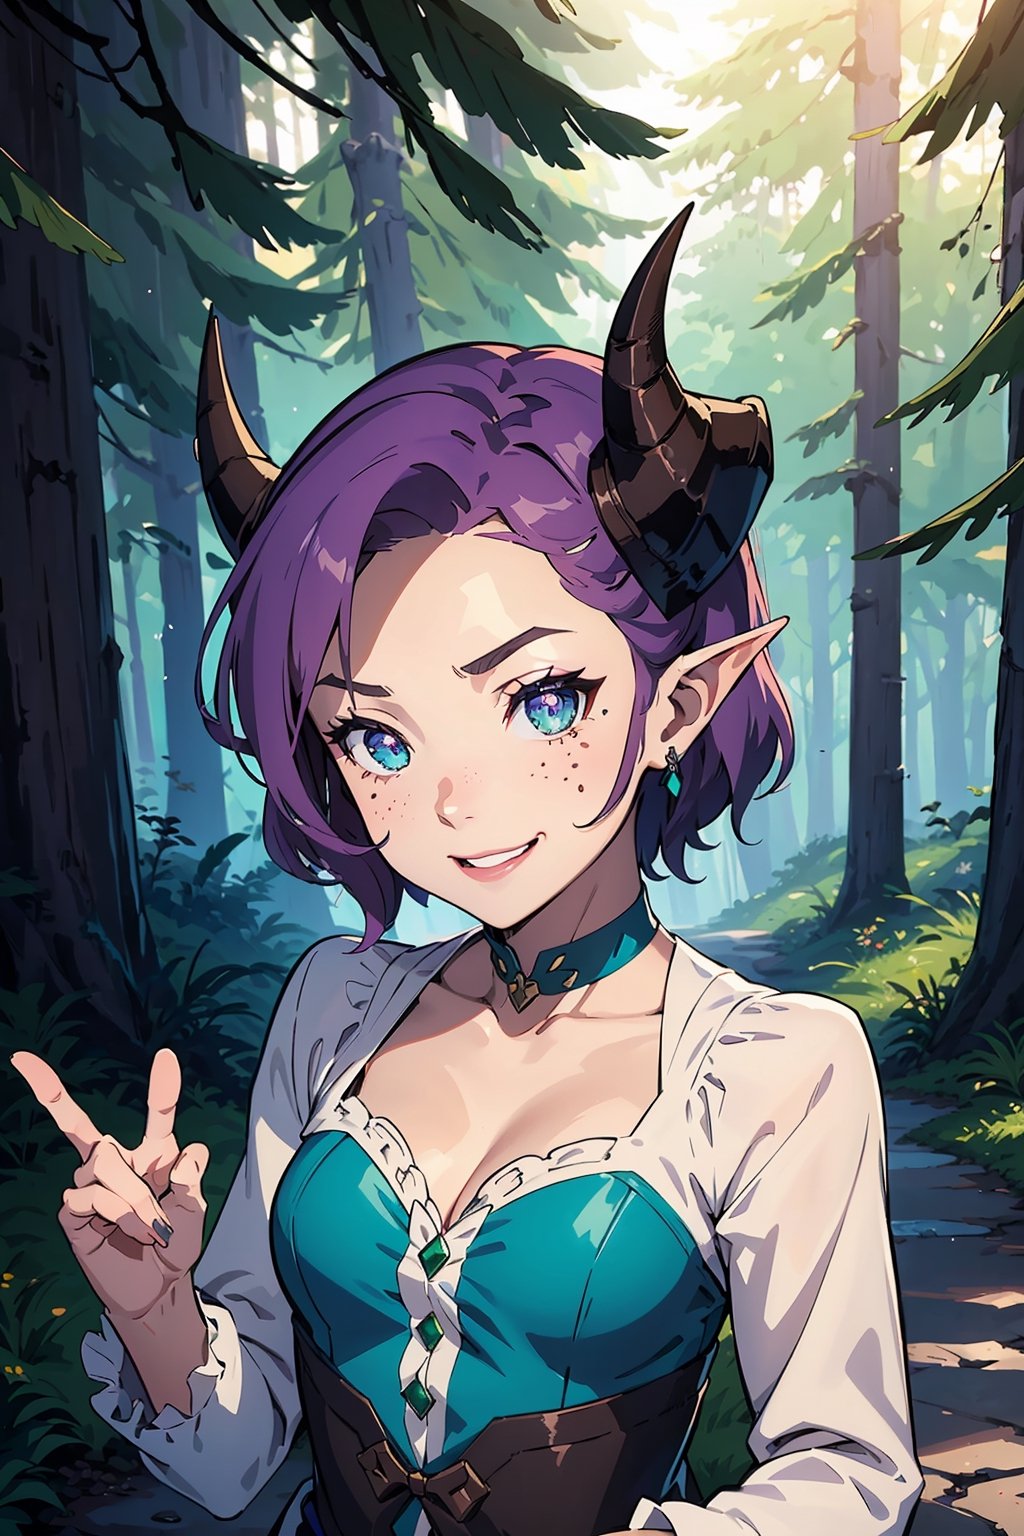 Imagine a female child with short fluffy and messy curly bright purple hair in a pixie cut. She has small breasts and is a lolita. Her eyes are a bright shade of green, sparkling with intricate detail and a hit on magic. She has pointed elf ears. She has two short horns on her head. She has an evil smile on her face that shows she's up to no good. She has warm freckles on her face. She wears a white button up long sleeve top and a long purple skirt and long green trench coat with lots of pockets. She is practicing magic that sparkles around her. The background is a charming forest path in the enchanted woods with bright lighting, creating a magical ambiance. This artwork captures the essence of mischief and magic against the backdrop of a beautiful setting. detailed, detail_eyes, detailed_hair, detailed_scenario, detailed_hands, detailed_background, vox machina style,vox machina style,fantai12